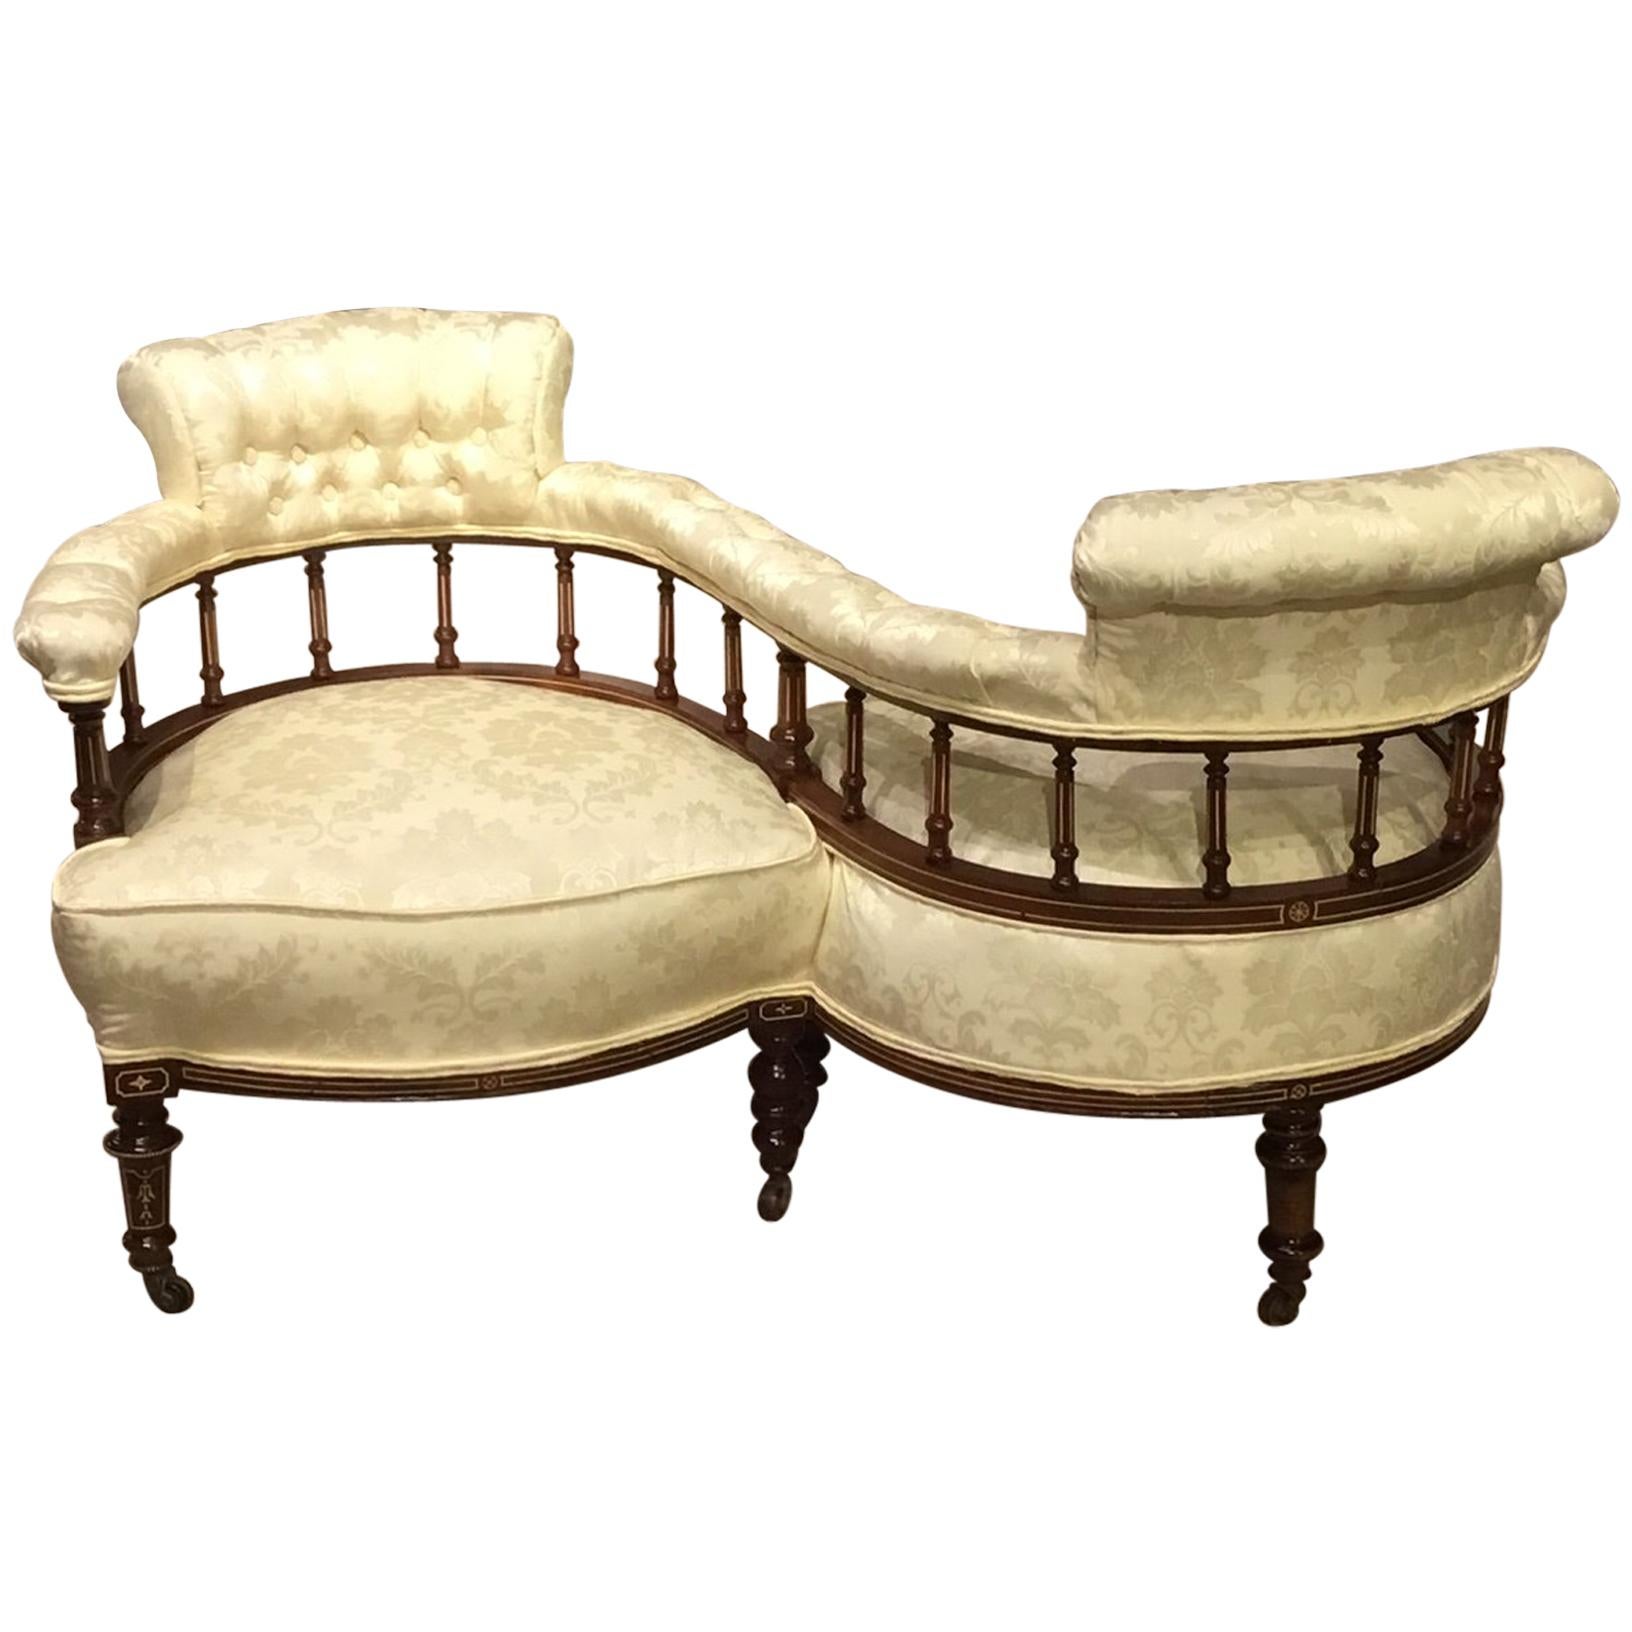 Edwardian Period Mahogany Inlaid Antique Love Seat For Sale